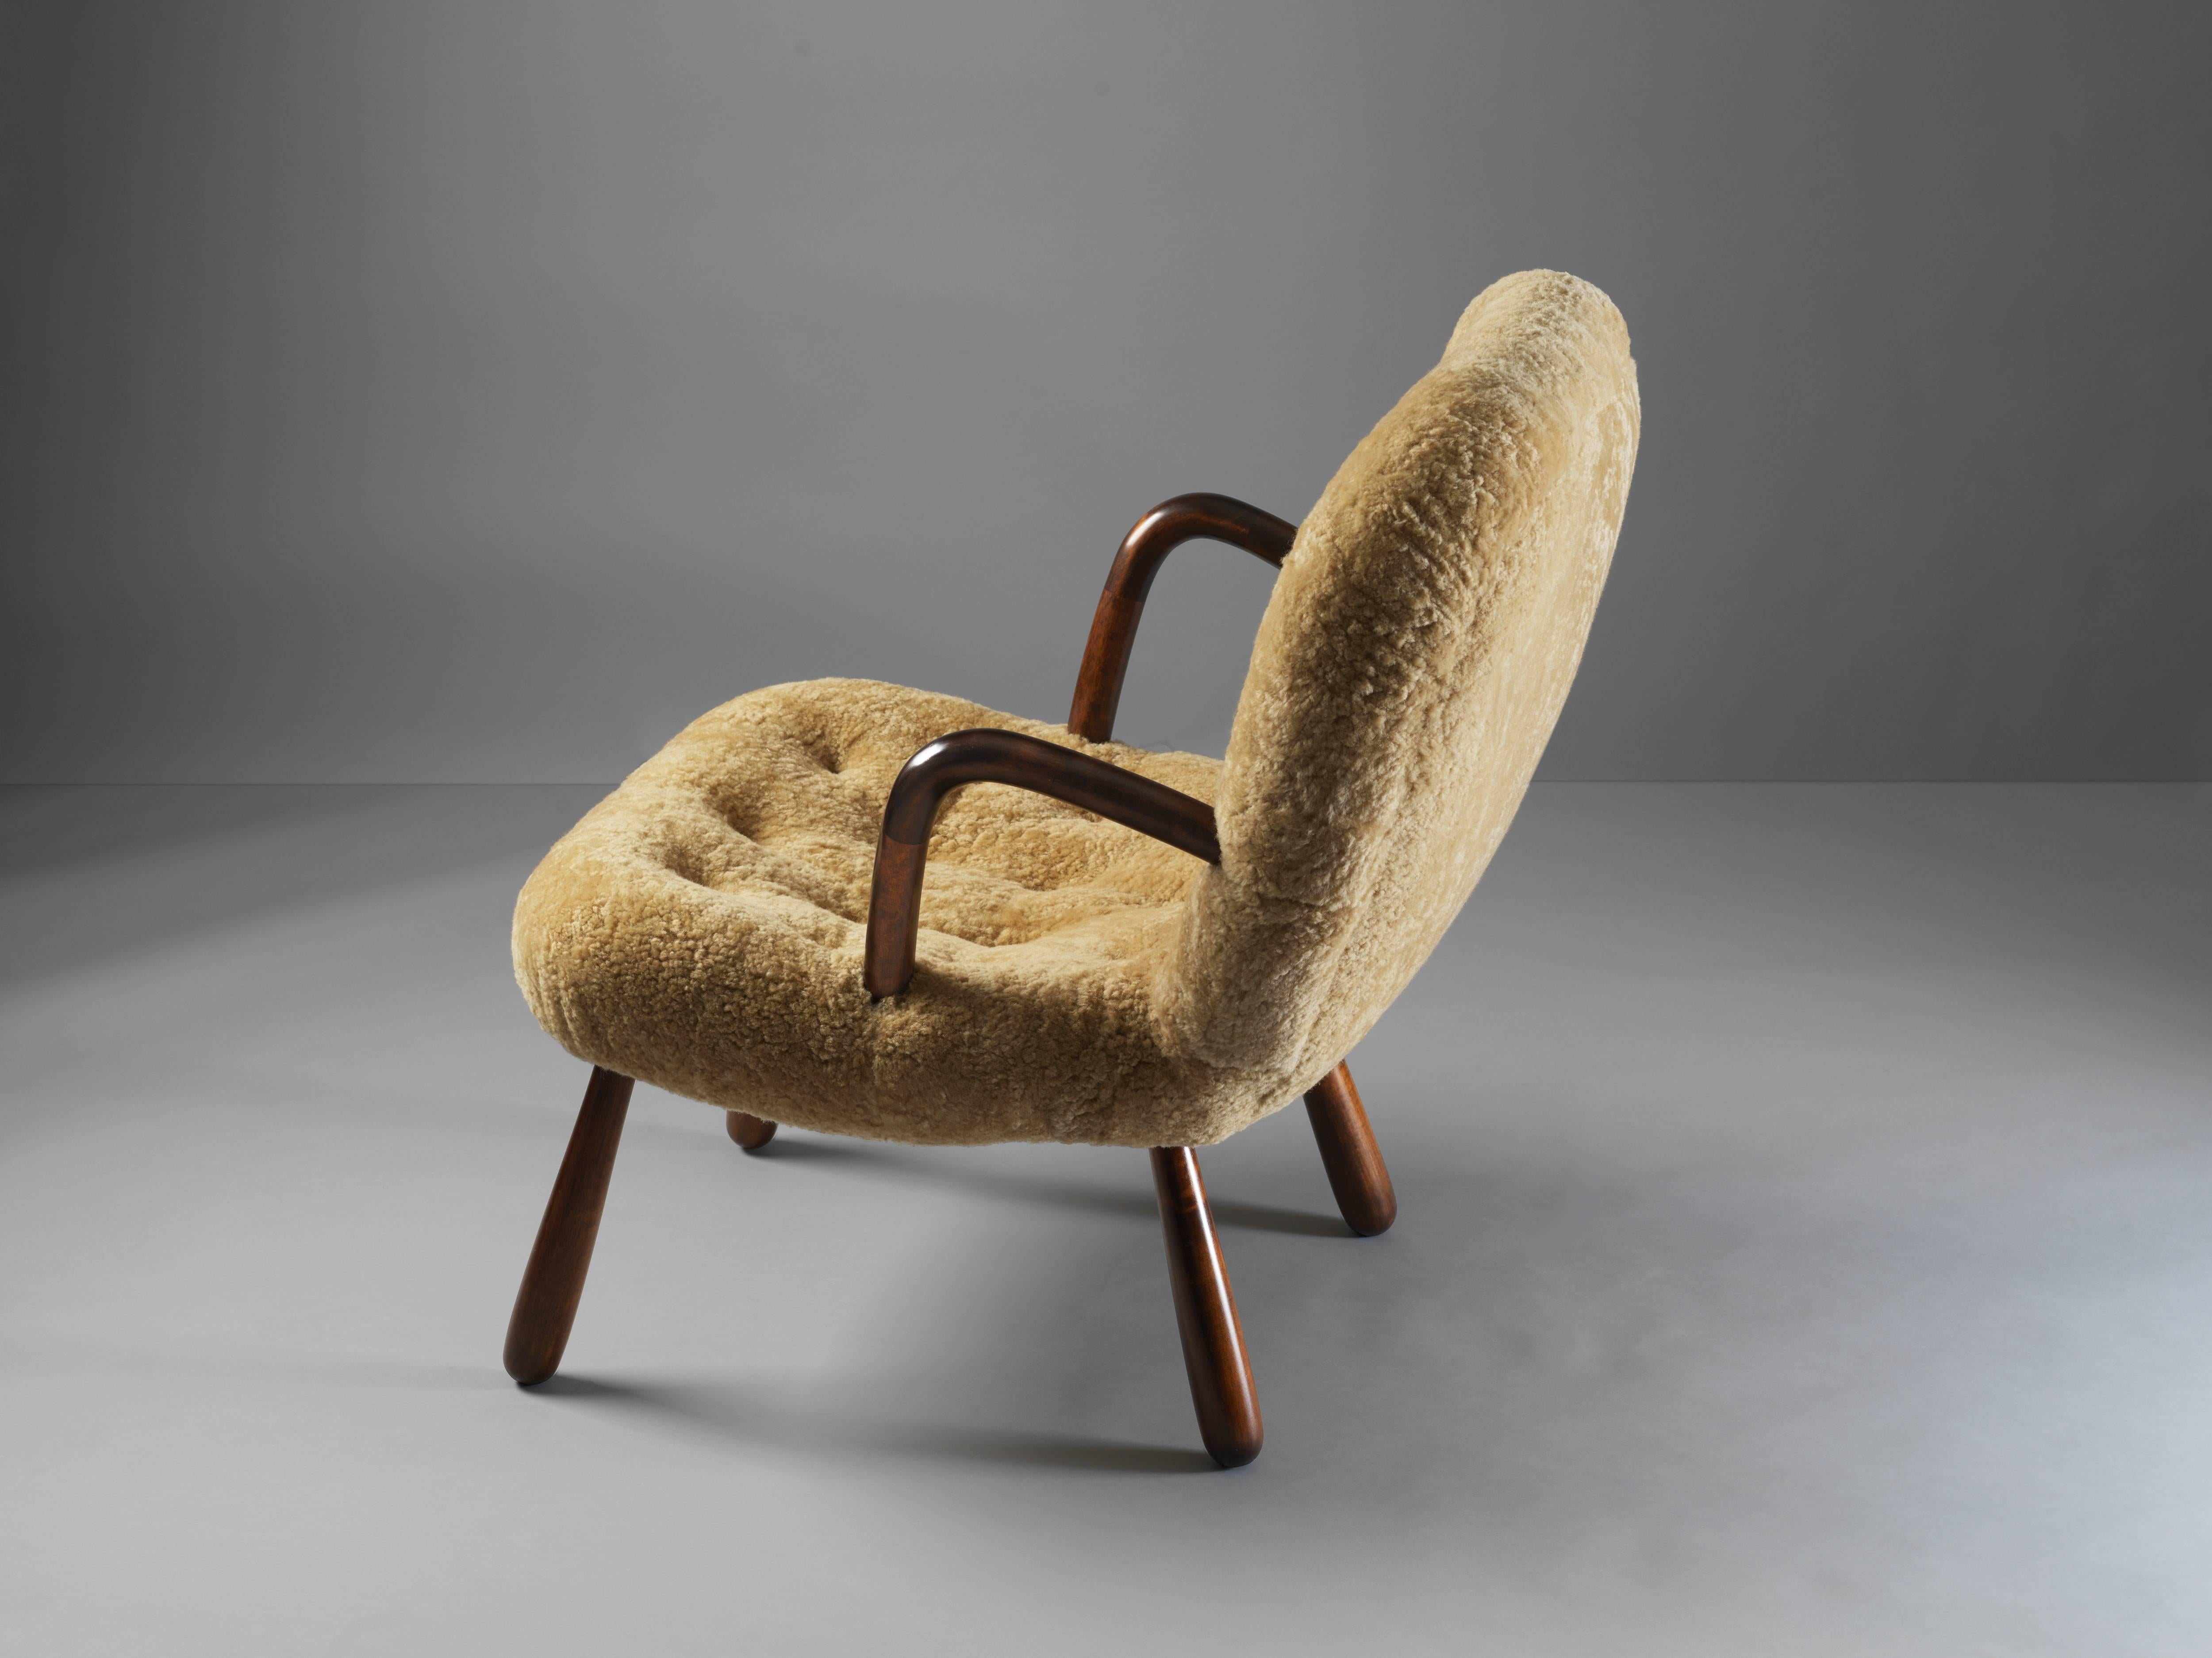 Scandinavian Modern Philip Arctander ( attributed) Clam Armchair Lambskin and Stained Wood, 1940s